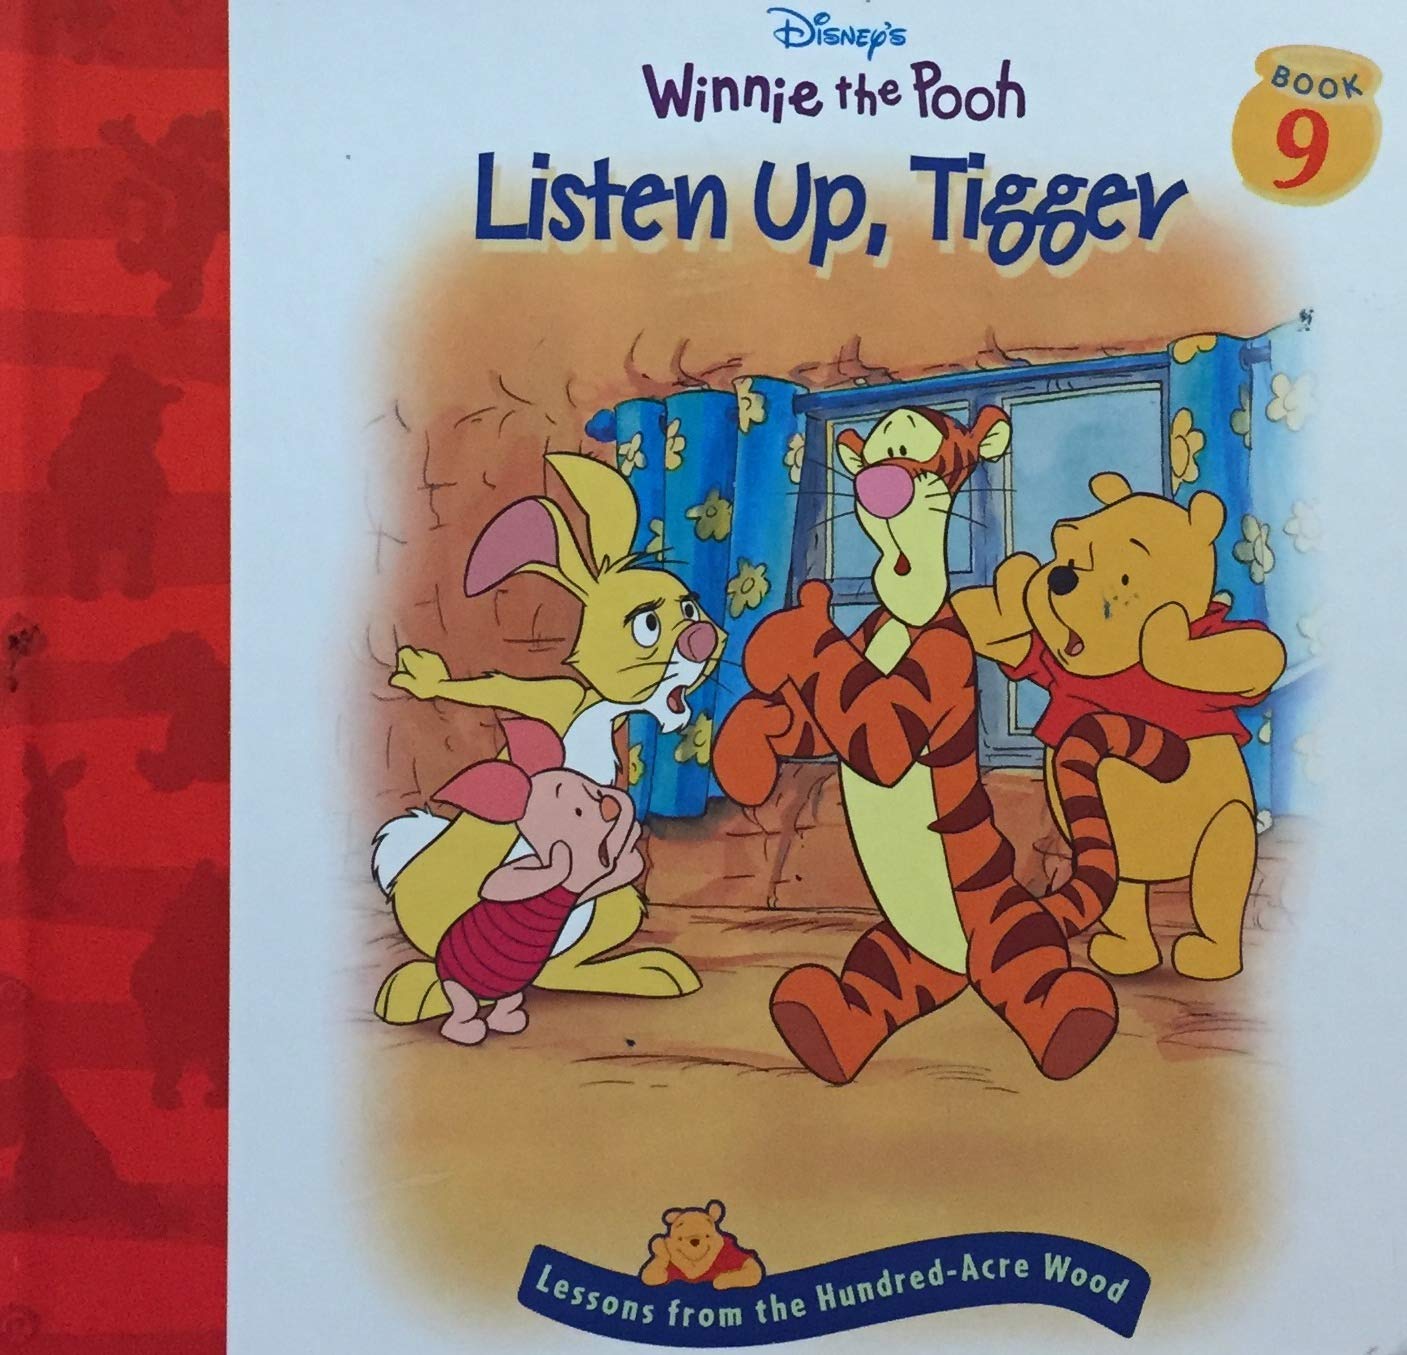 Livre ISBN 0579730957 Winnie the Pooh (Lessons from the Hundred-Acre Wood) # 9 : Listen Up, Tigger (Disney)